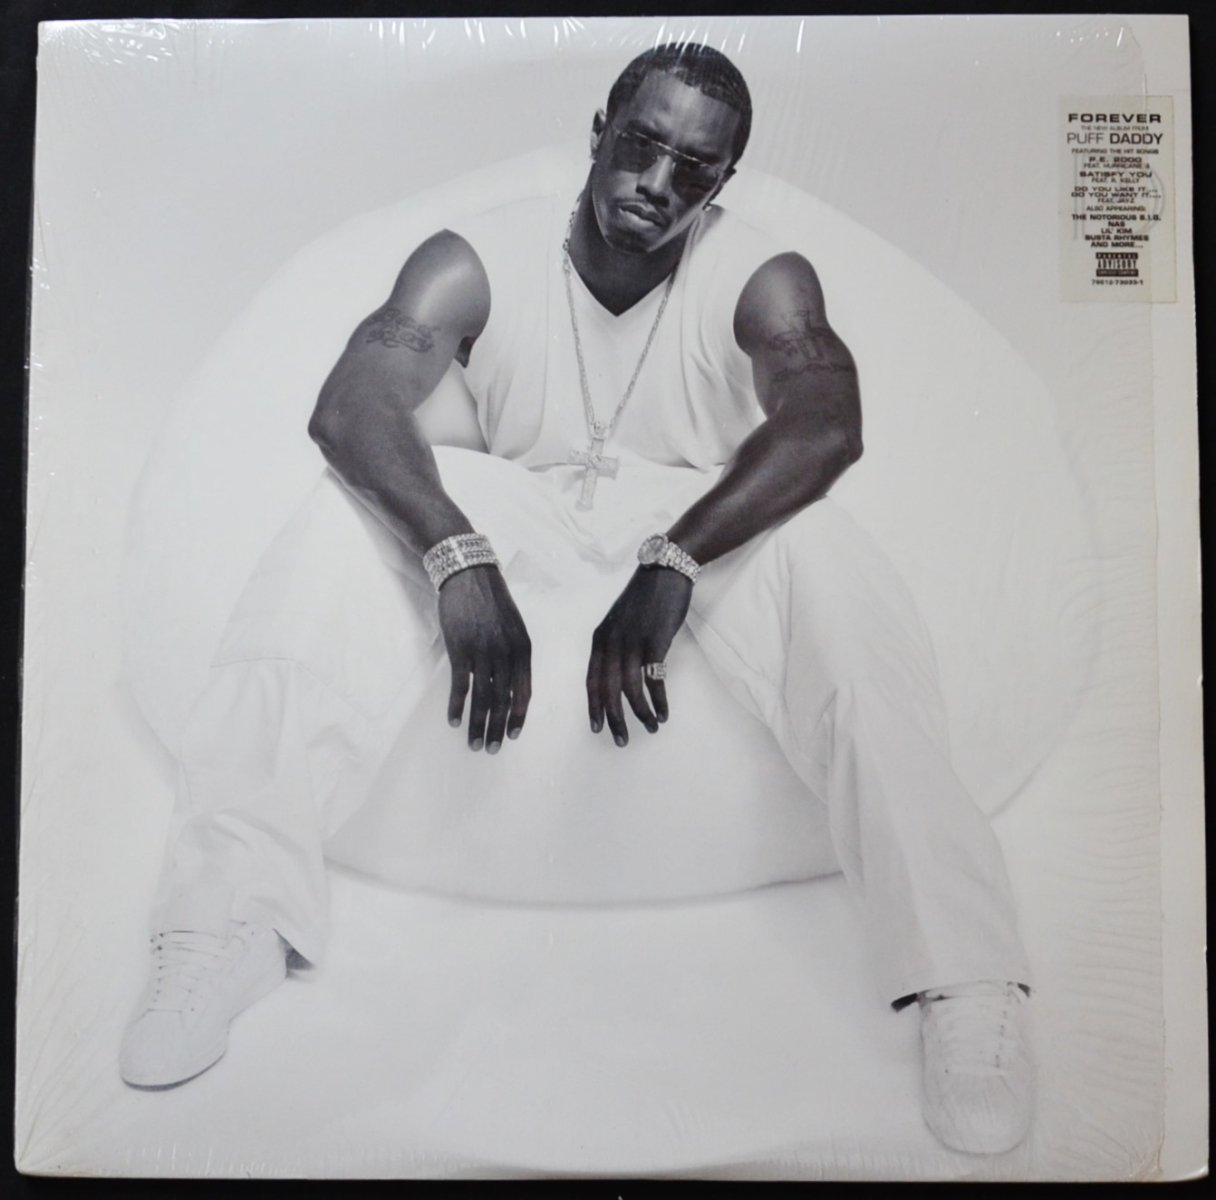 PUFF DADDY / FOREVER (2LP)